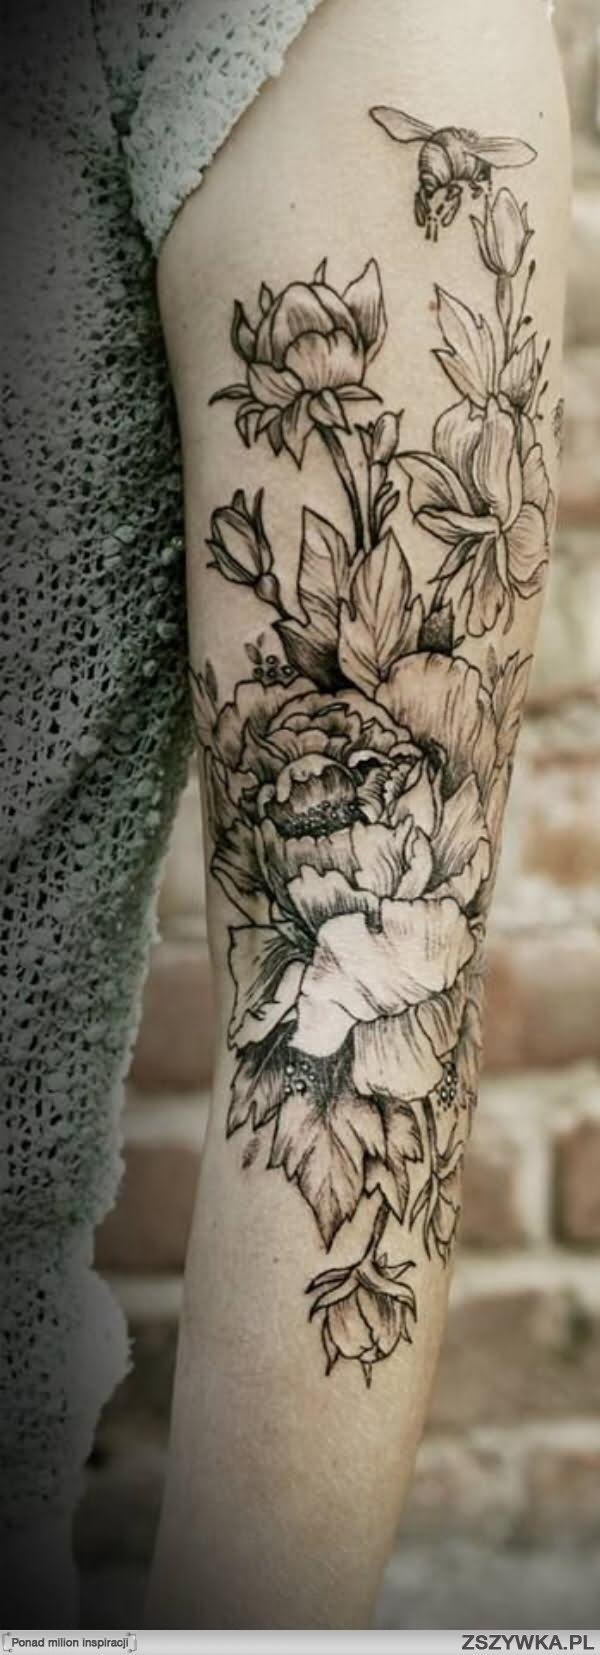 Mind Blowing Flying Bee And Flowers Tattoo On Full Sleeve